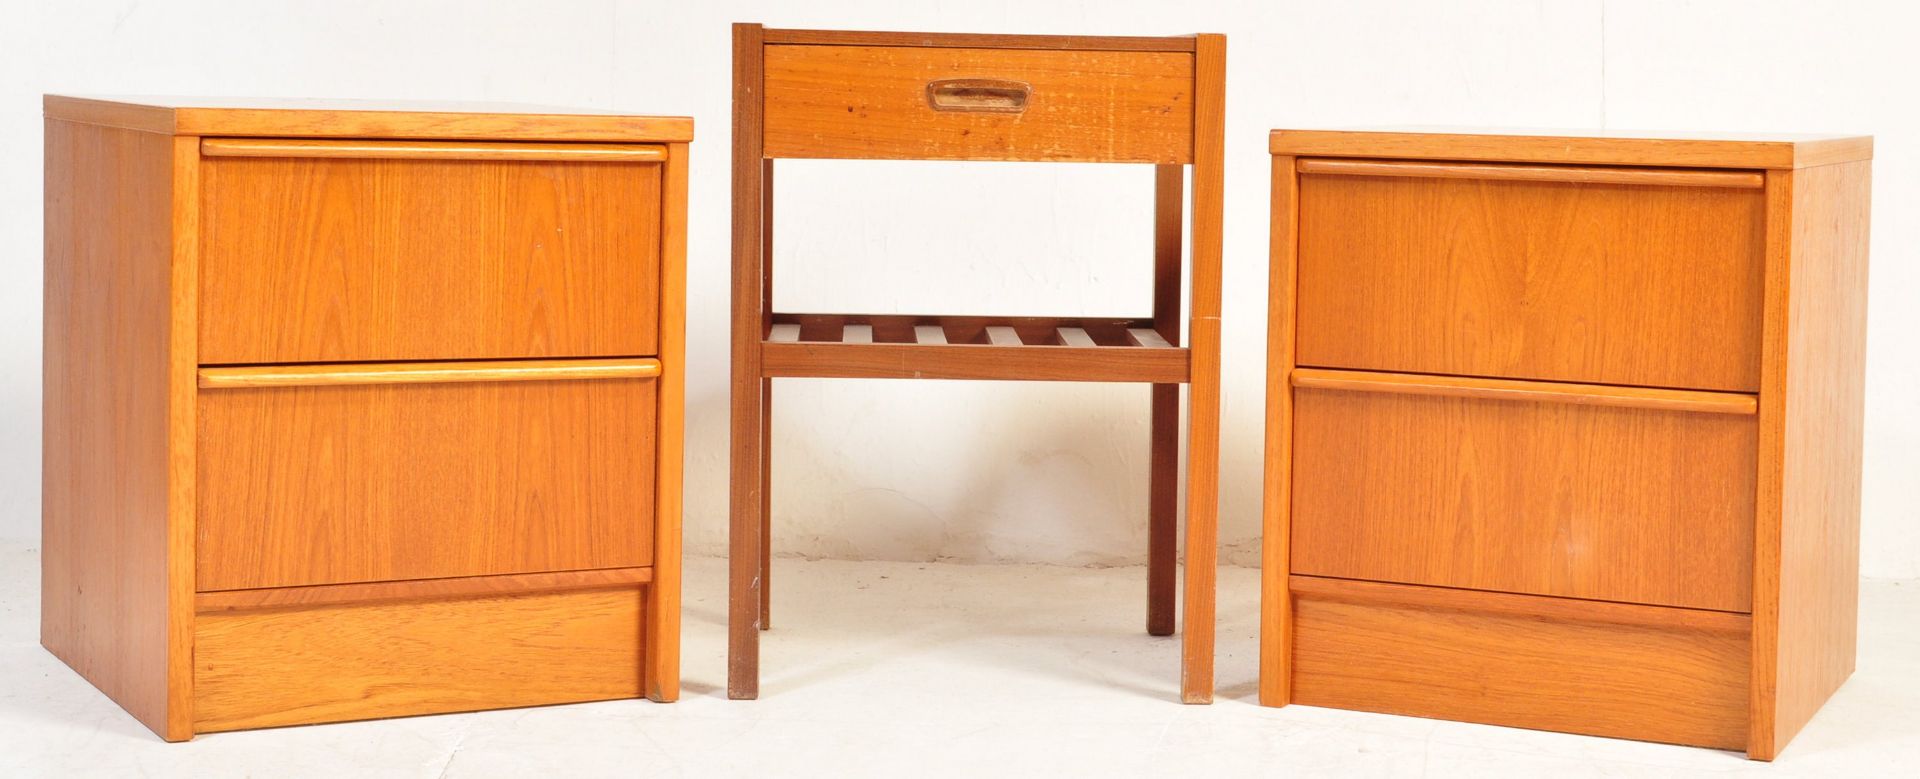 PAIR OF RETRO BEDSIDE CABINETS TOGETHER WITH A SINGLE DRAWER BEDSIDE CABINET